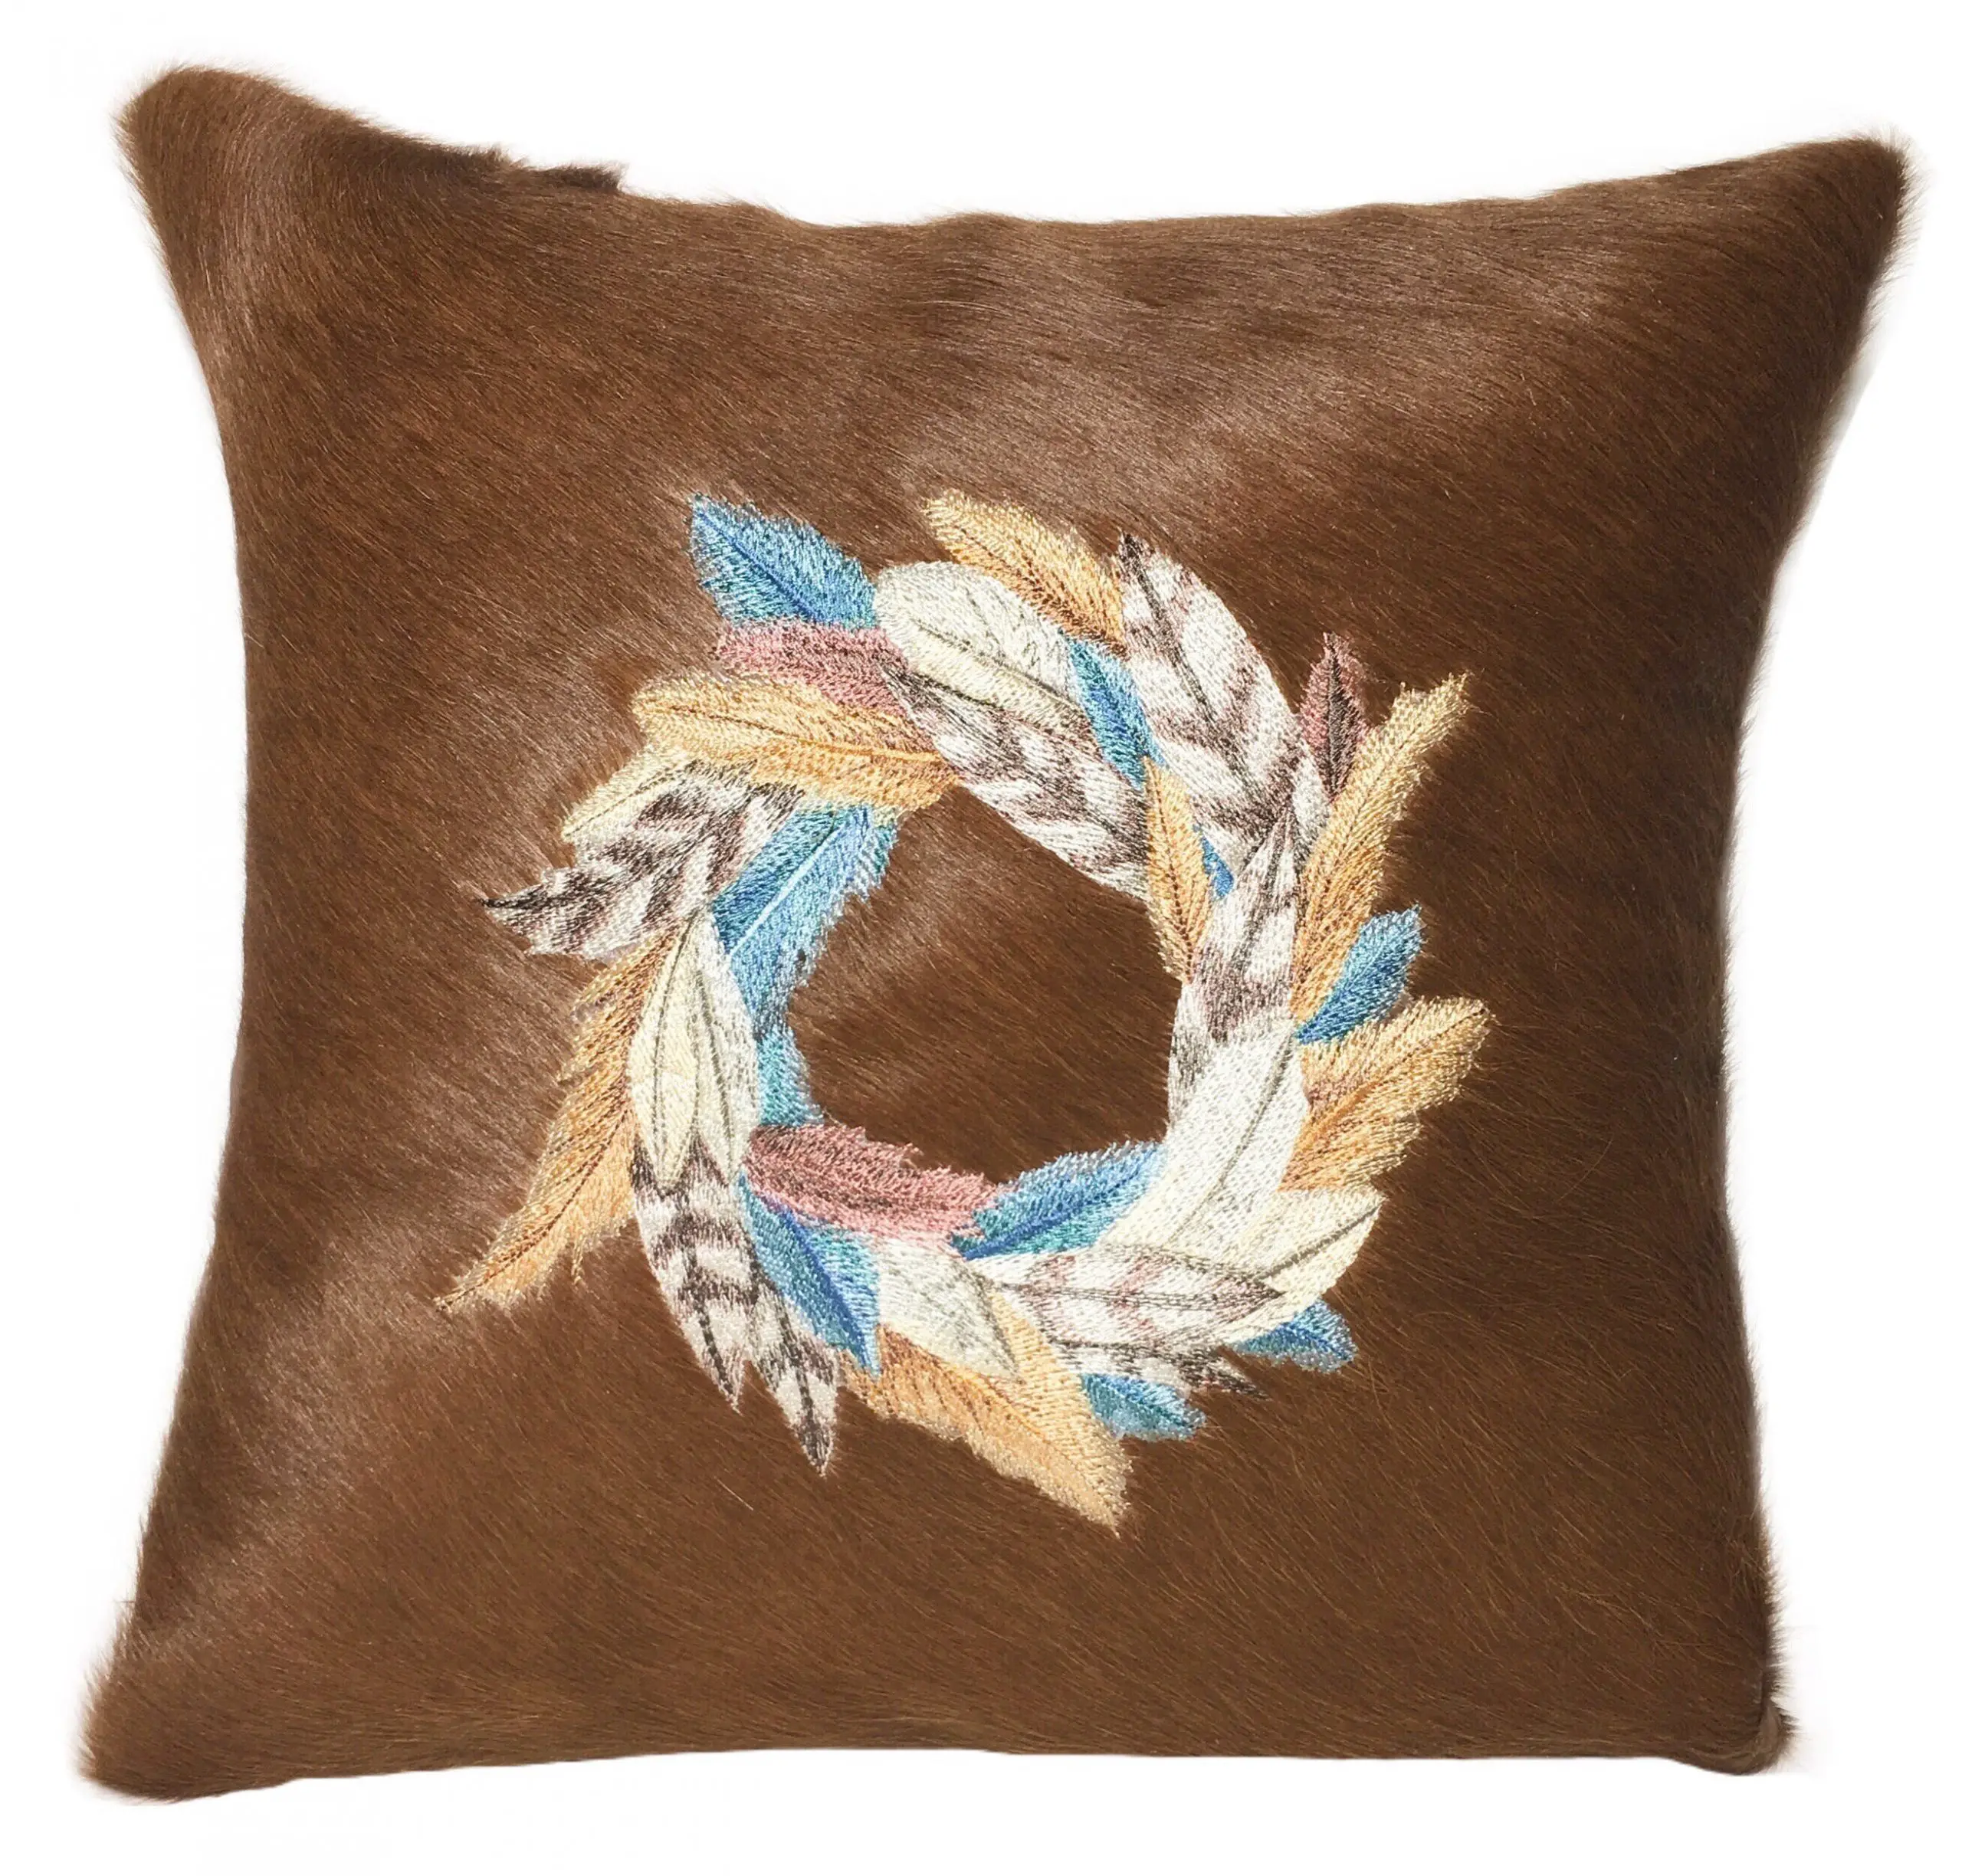 Turquoise Feather Wreath Pillow Blue Feathers Cowhide Pillow